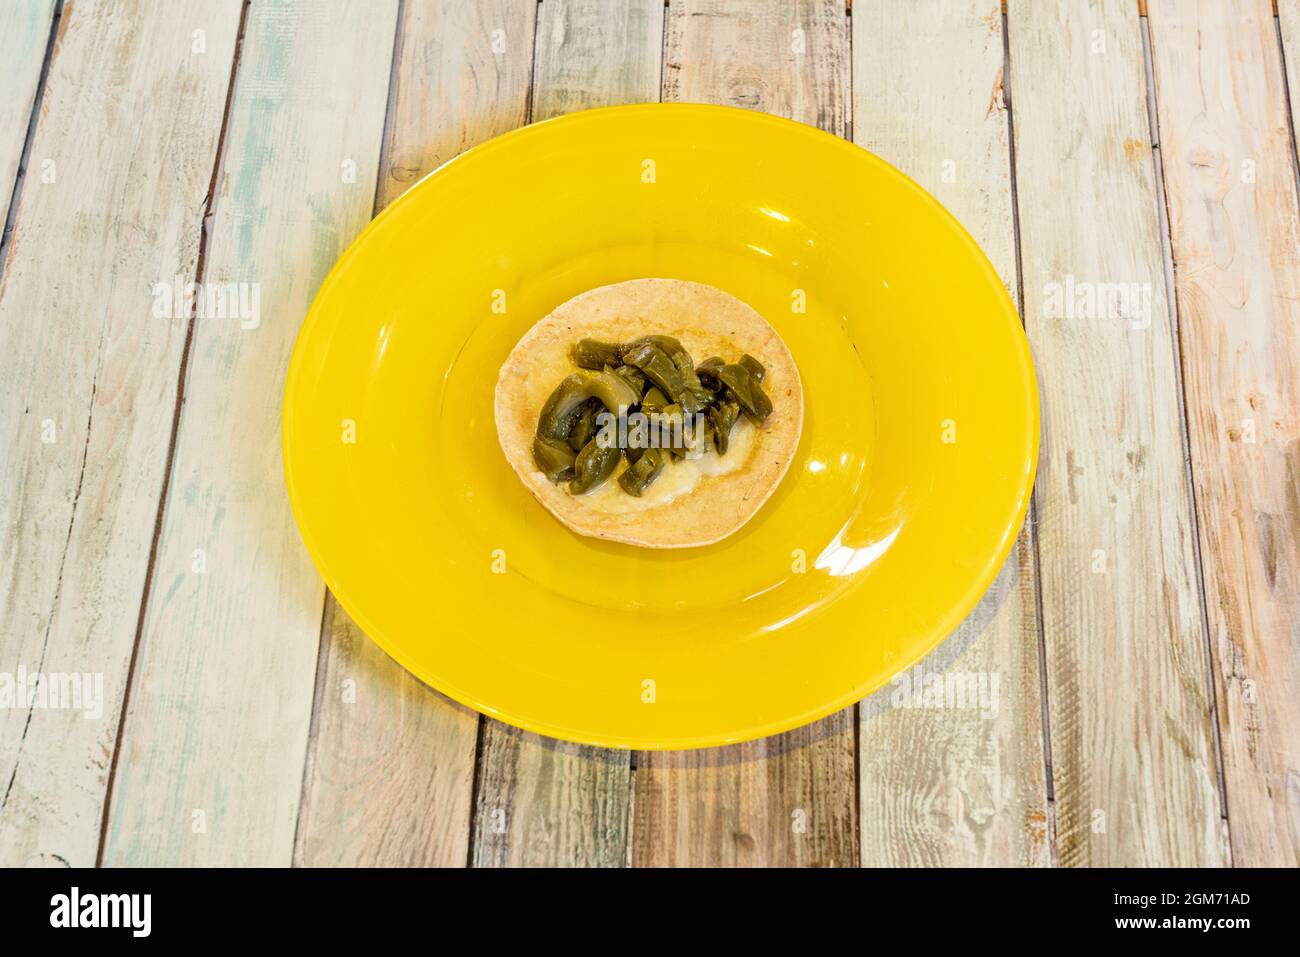 Simple taco of nopales with melted cheese and corn tortilla on a yellow plate. Stock Photo